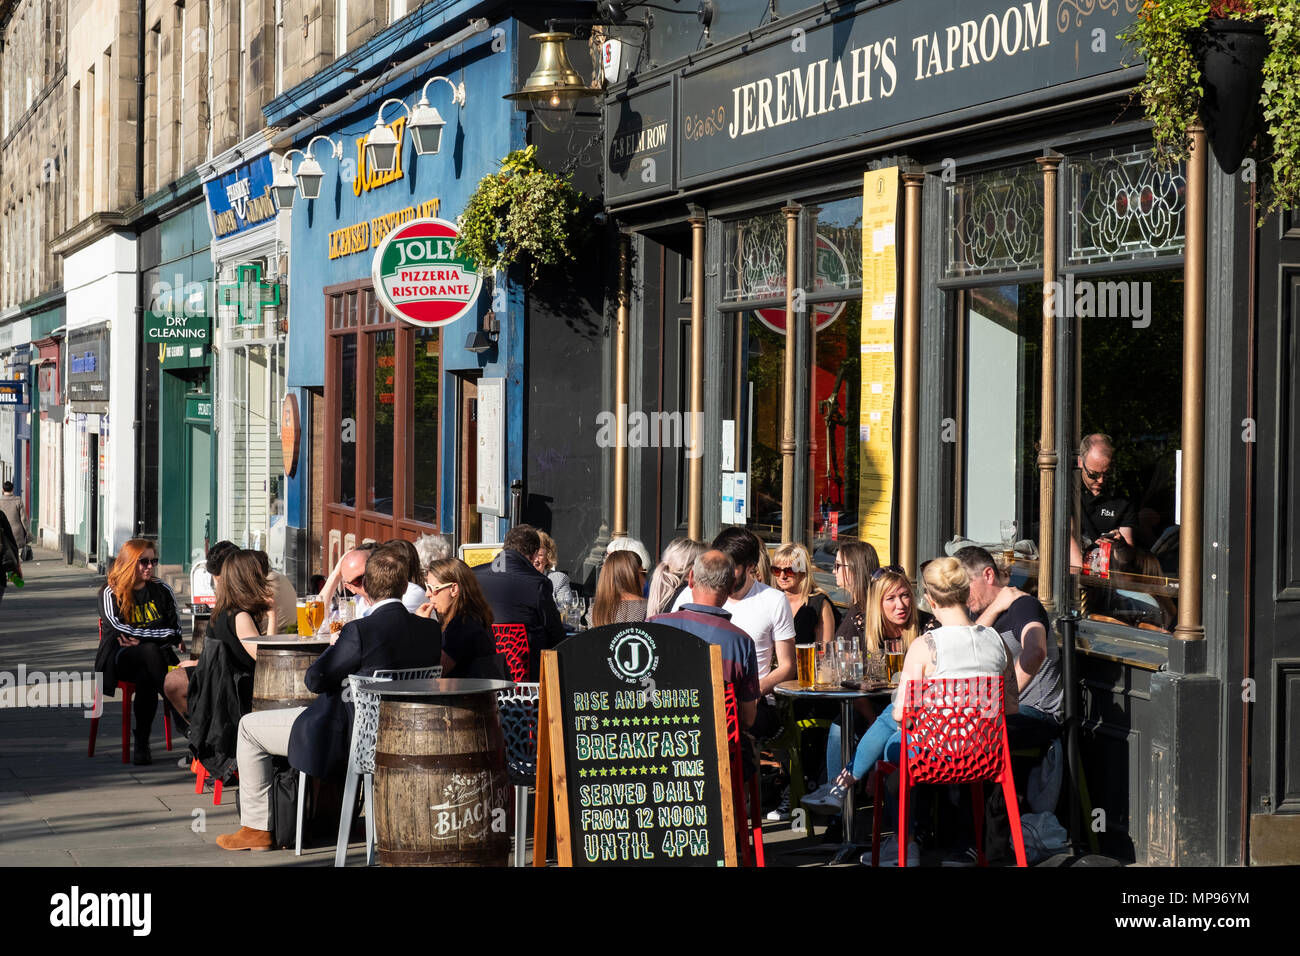 Exterior of Jeremiah's Taproom pub with people drinking outside on warm evening on Elm Row in Edinburgh, Scotland, UK, United Kingdom Stock Photo